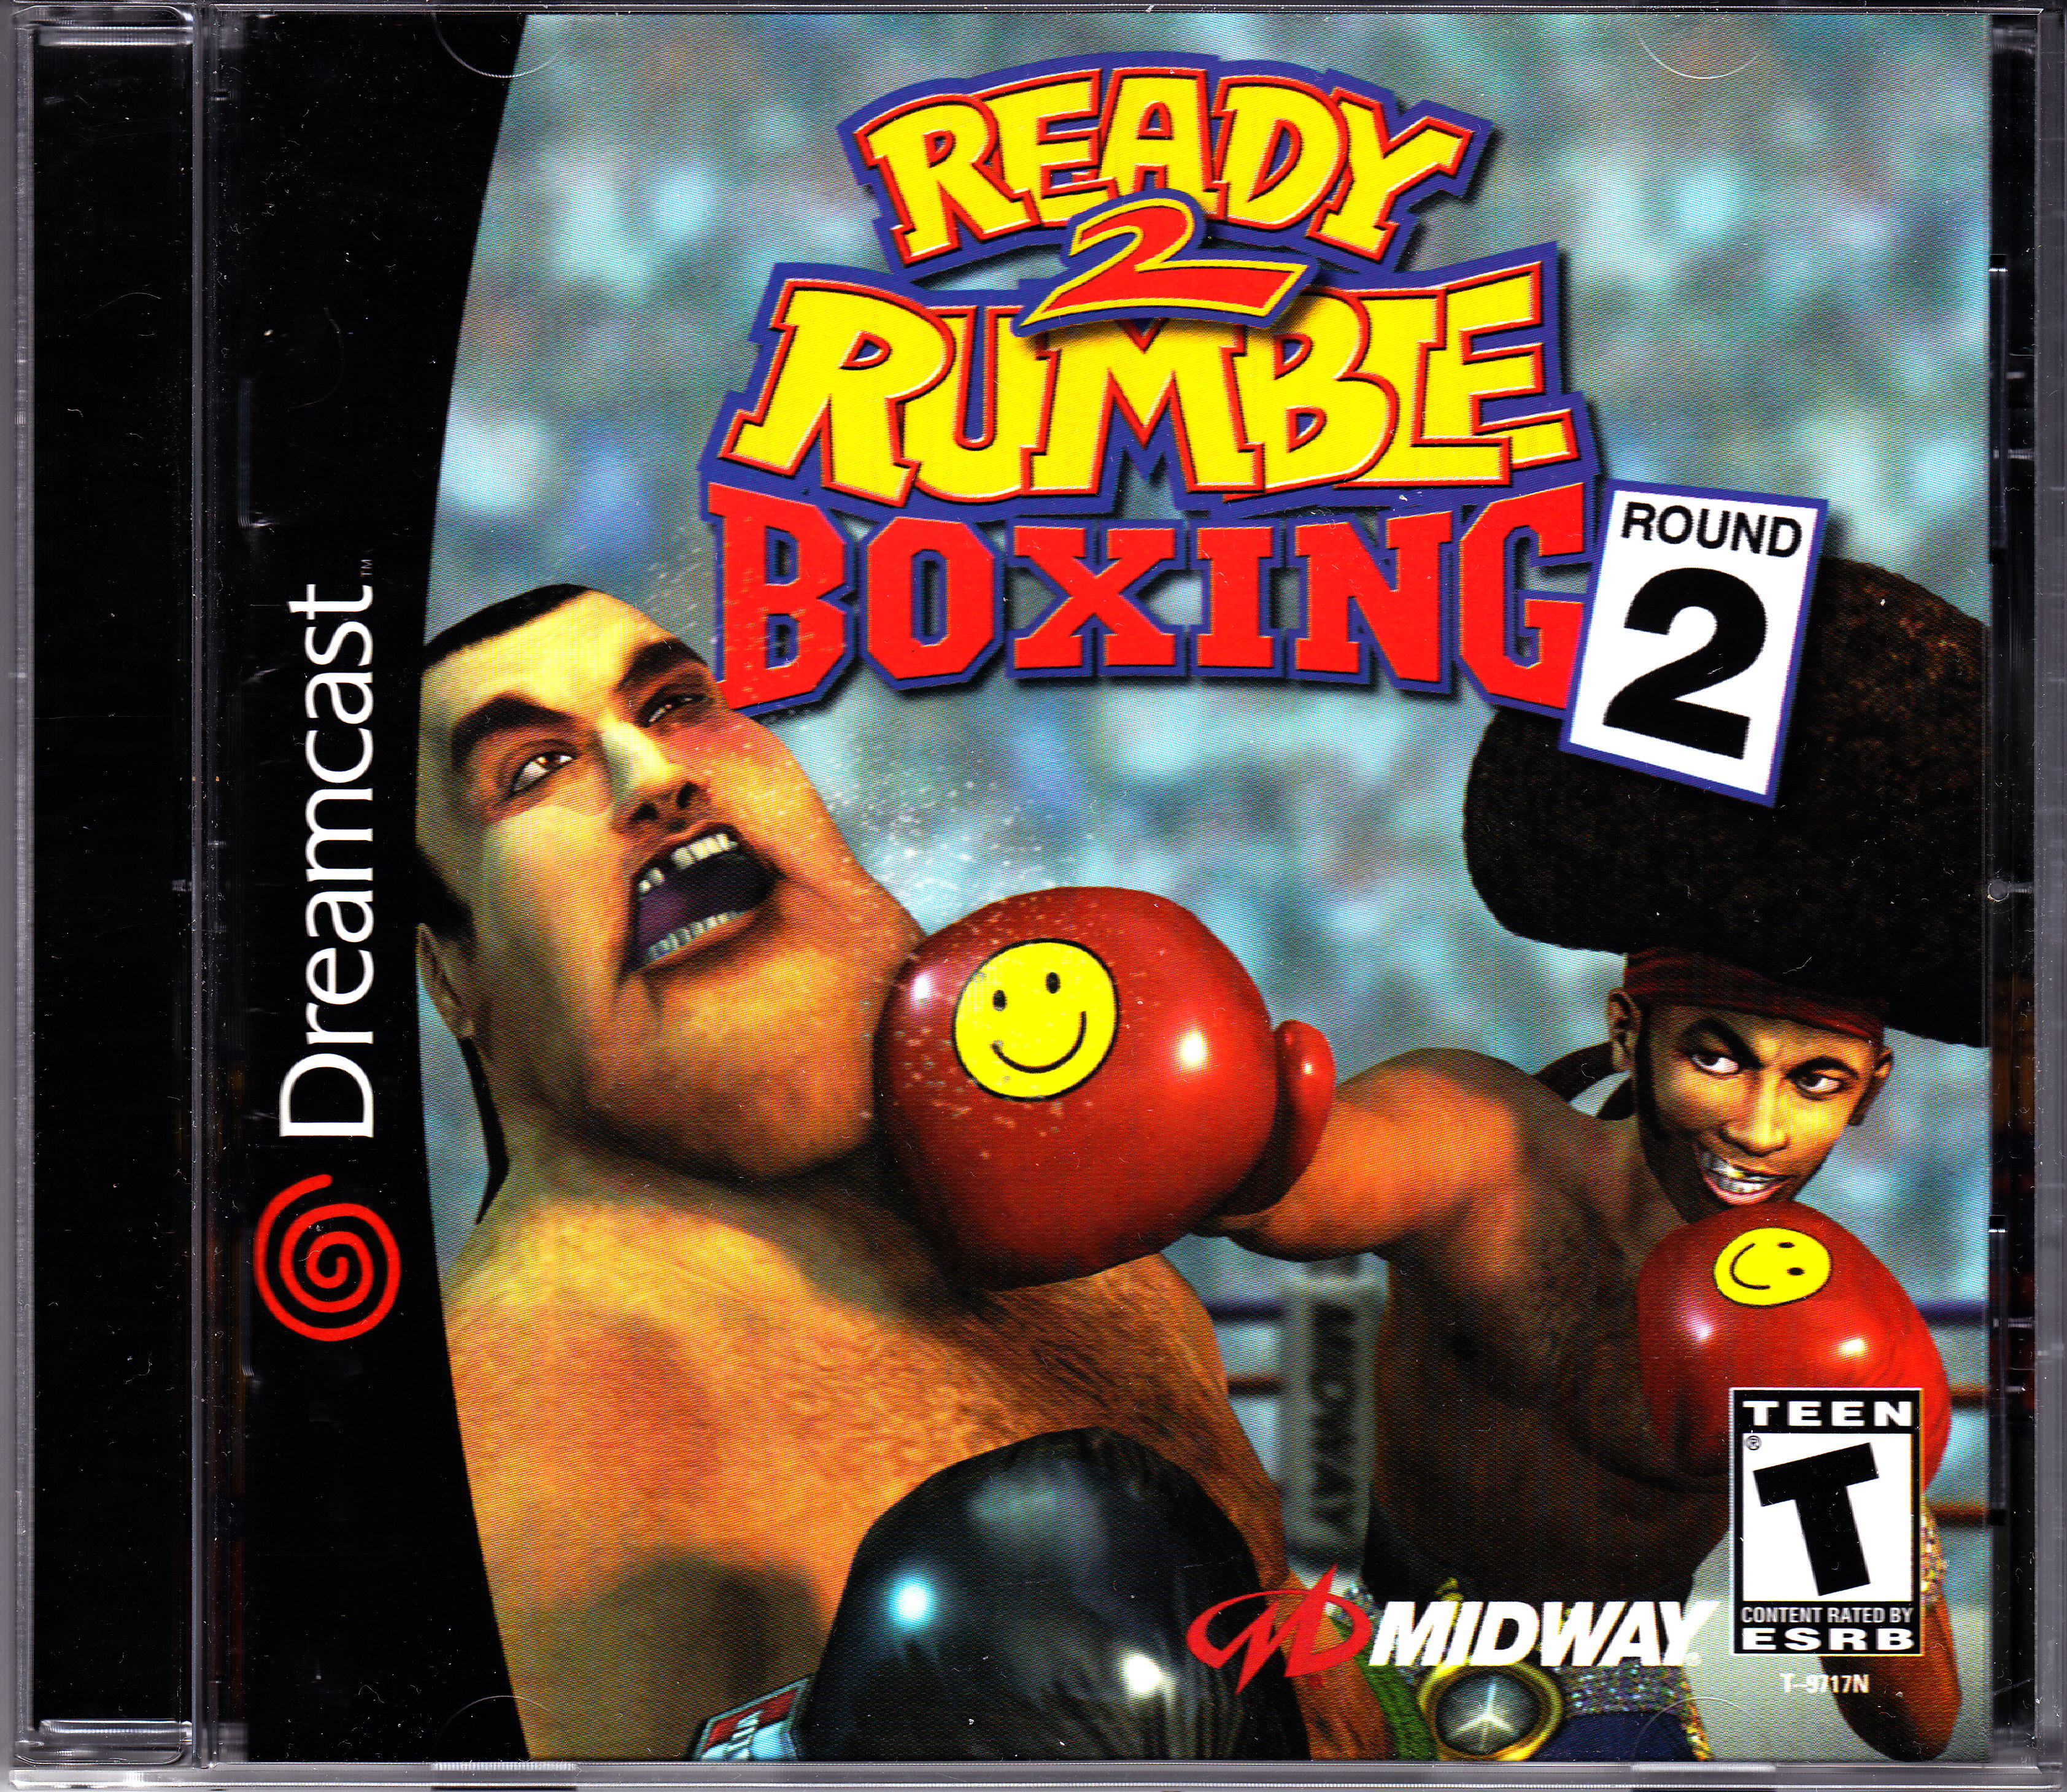 Ready 2 Rumble Boxing для Sega Dreamcast. Бокс диска ps2. Ready 2 Rumble Boxing Round 2 Michael Jackson. Ready 2 Rumble Boxing на ps5. Ready 2 use